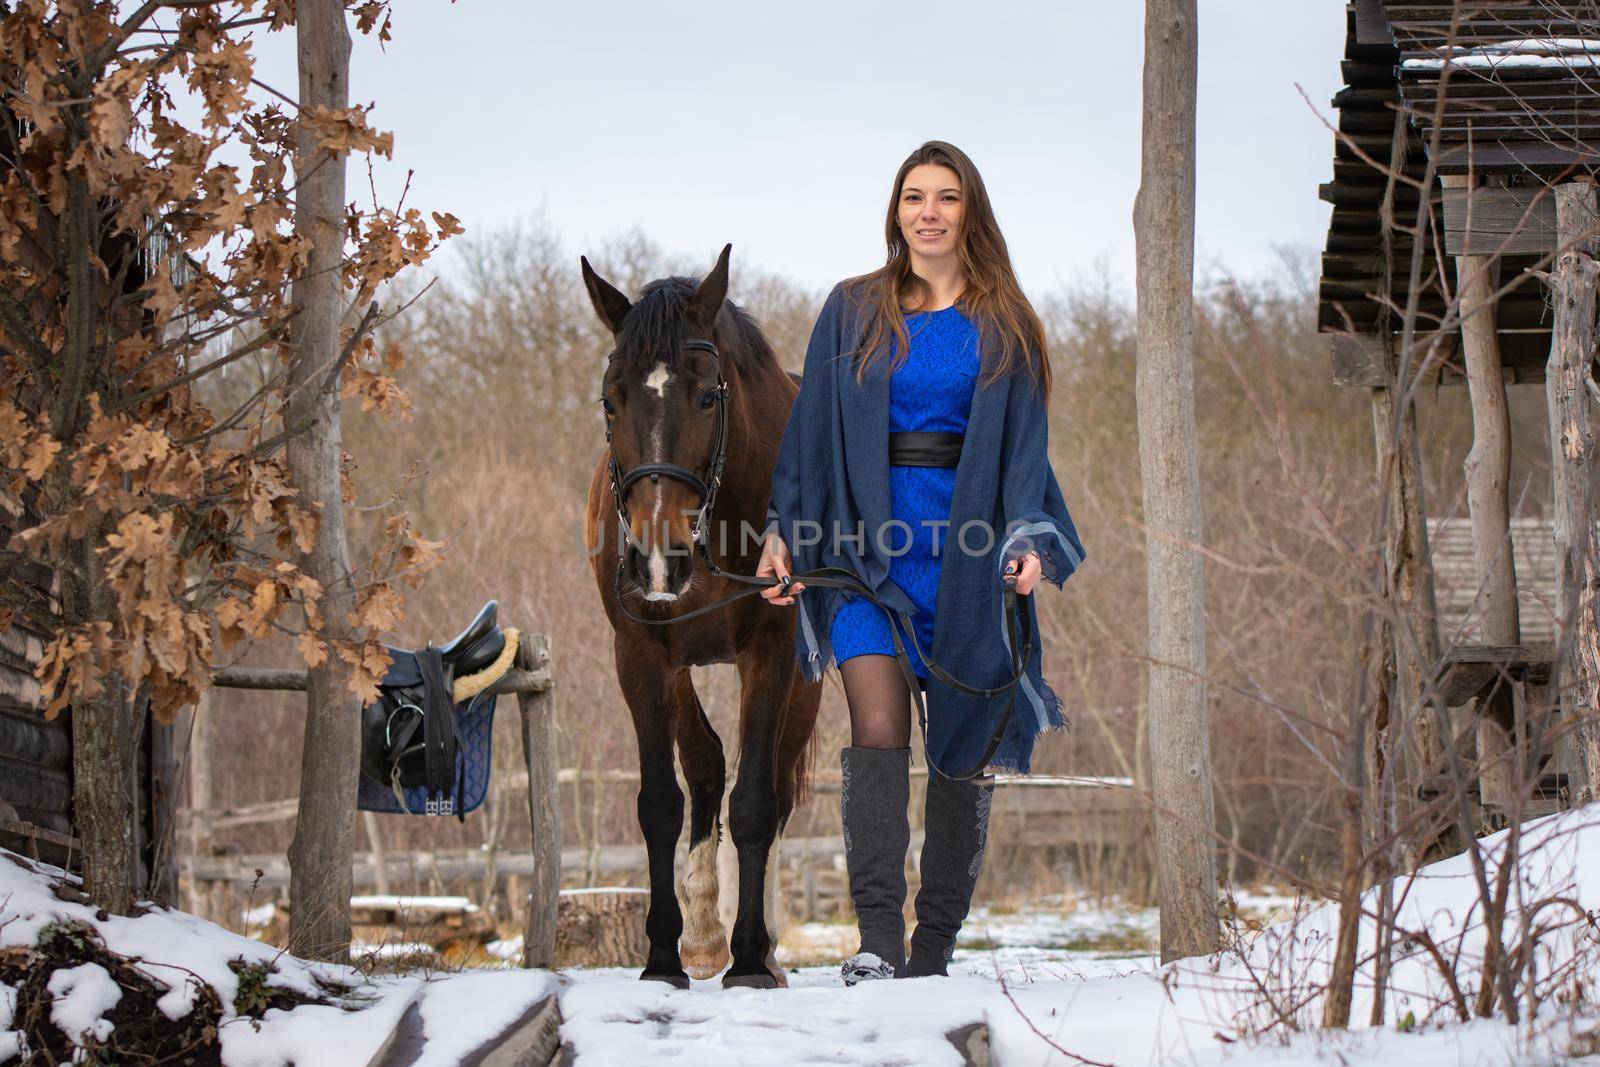 A girl in a blue dress walks with a horse through the winter forest and old wooden ruins by Madhourse